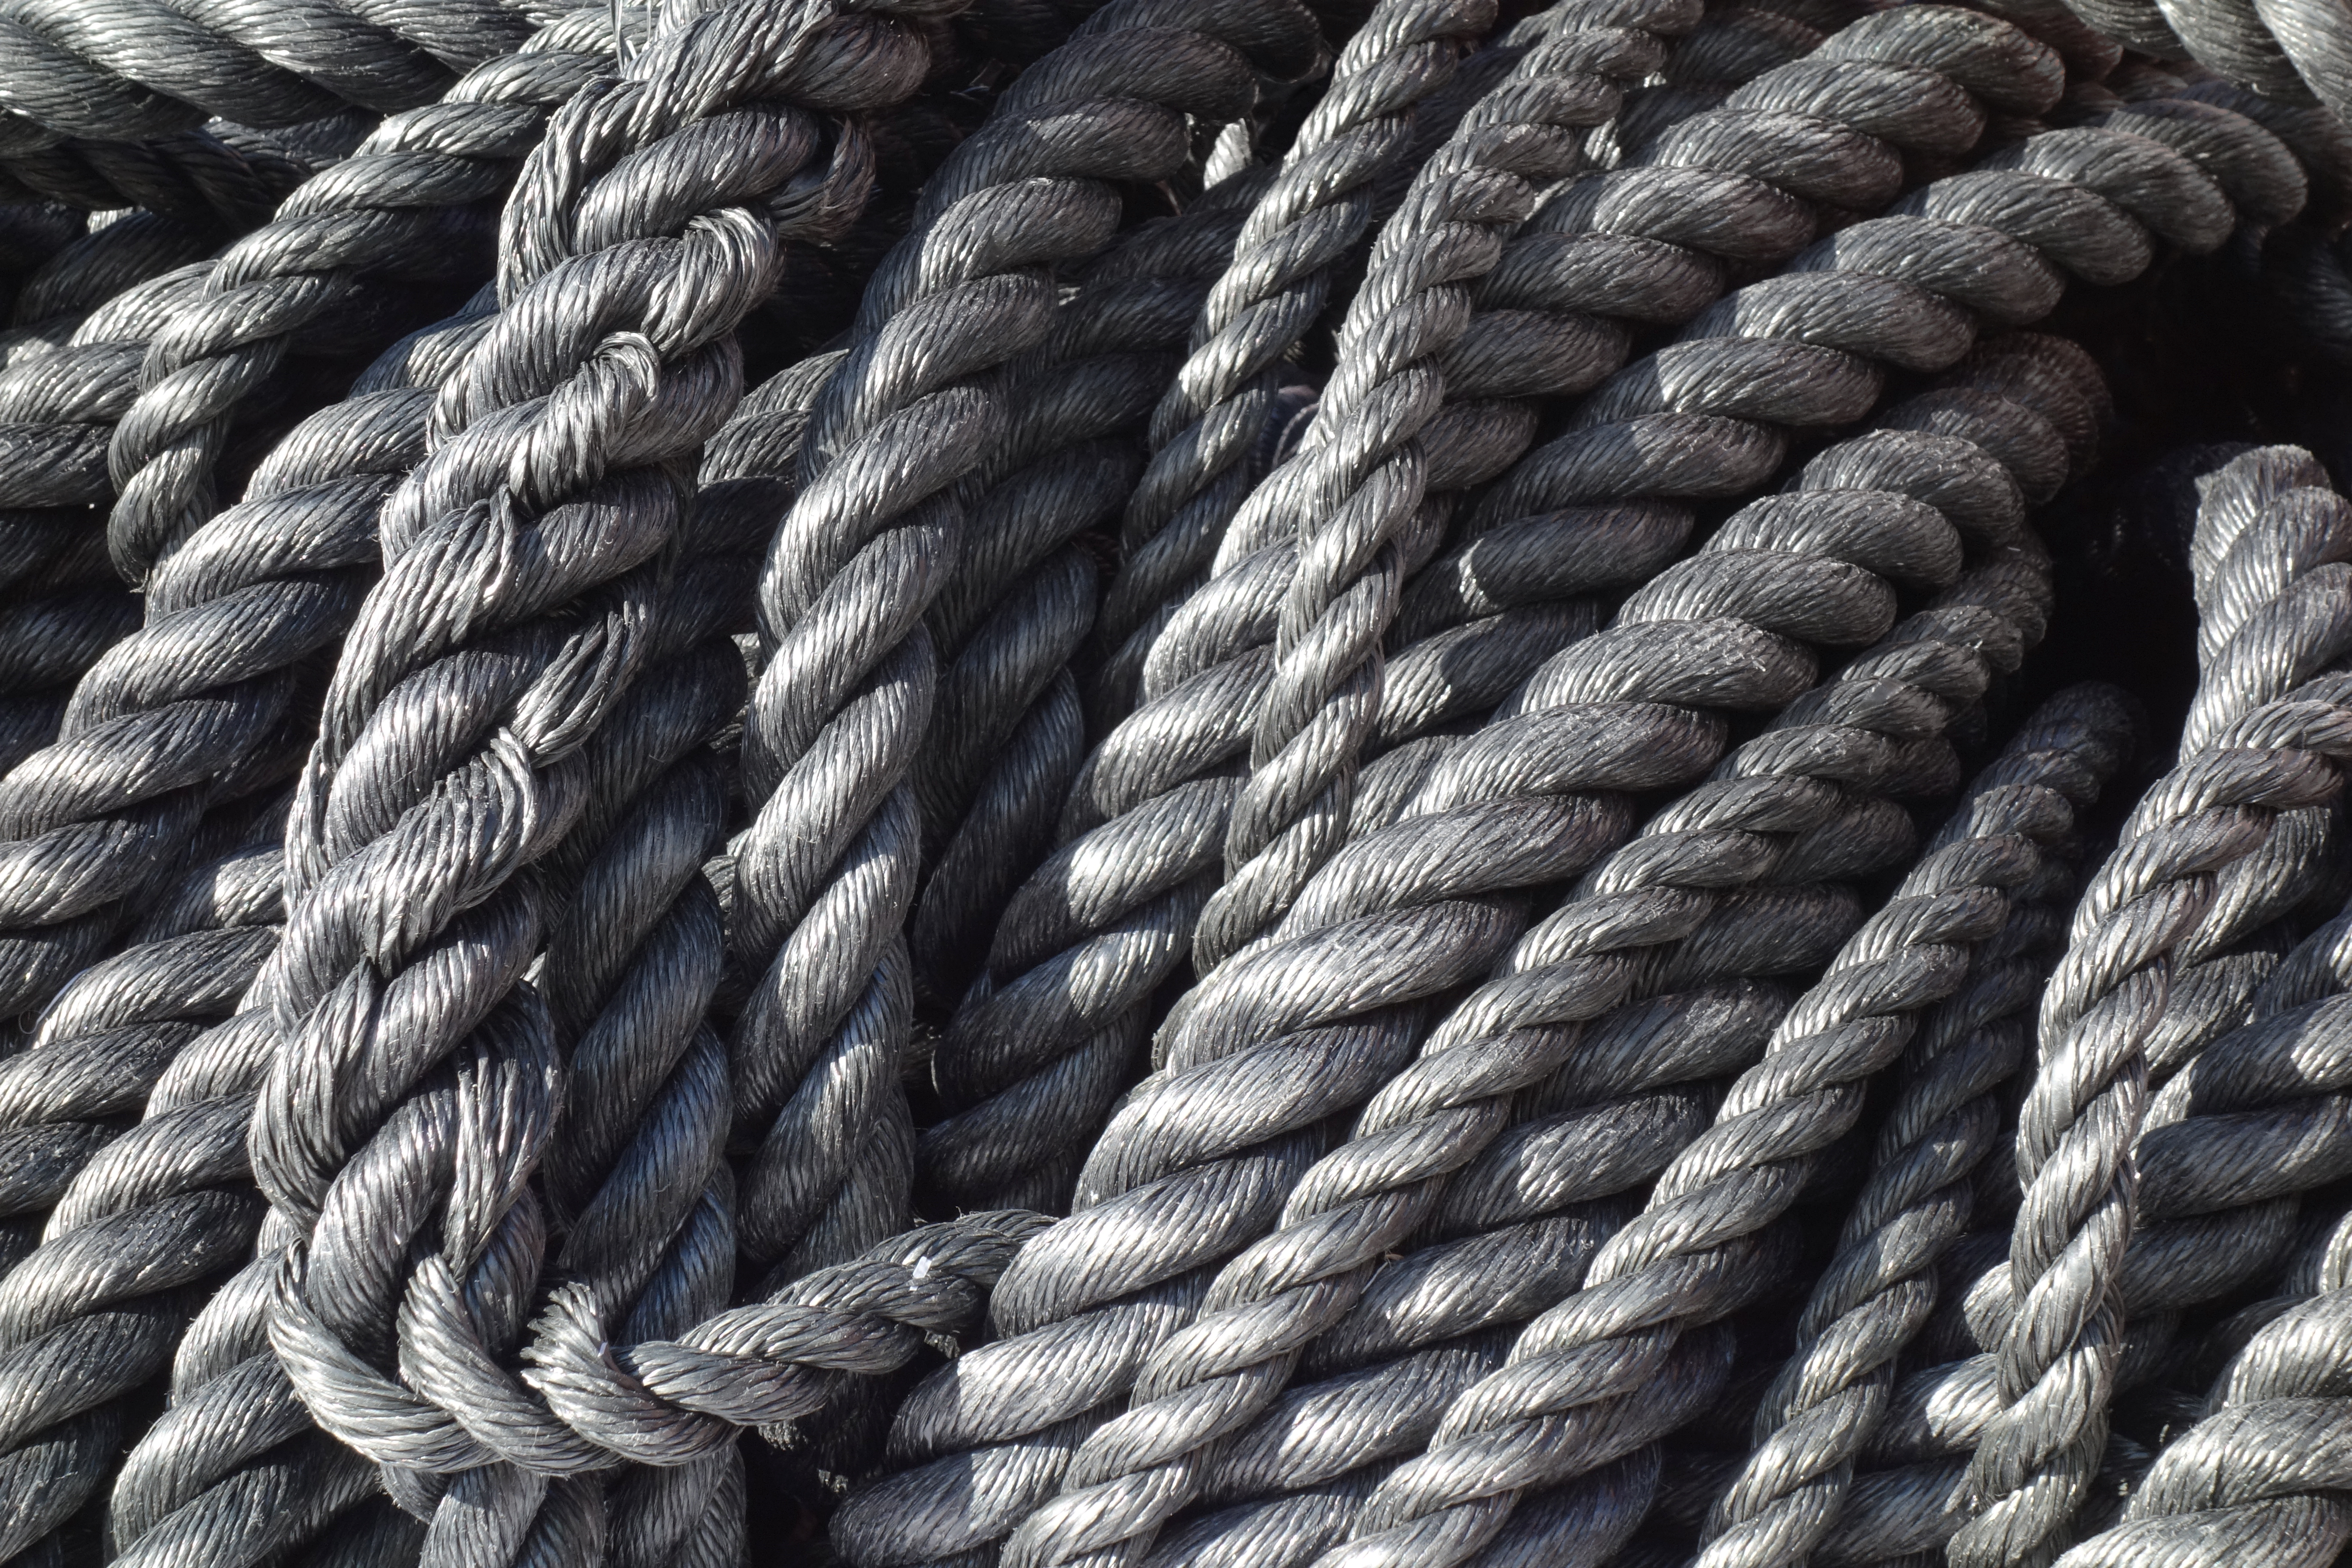 File:Grey synthetic rope.jpg - Wikimedia Commons